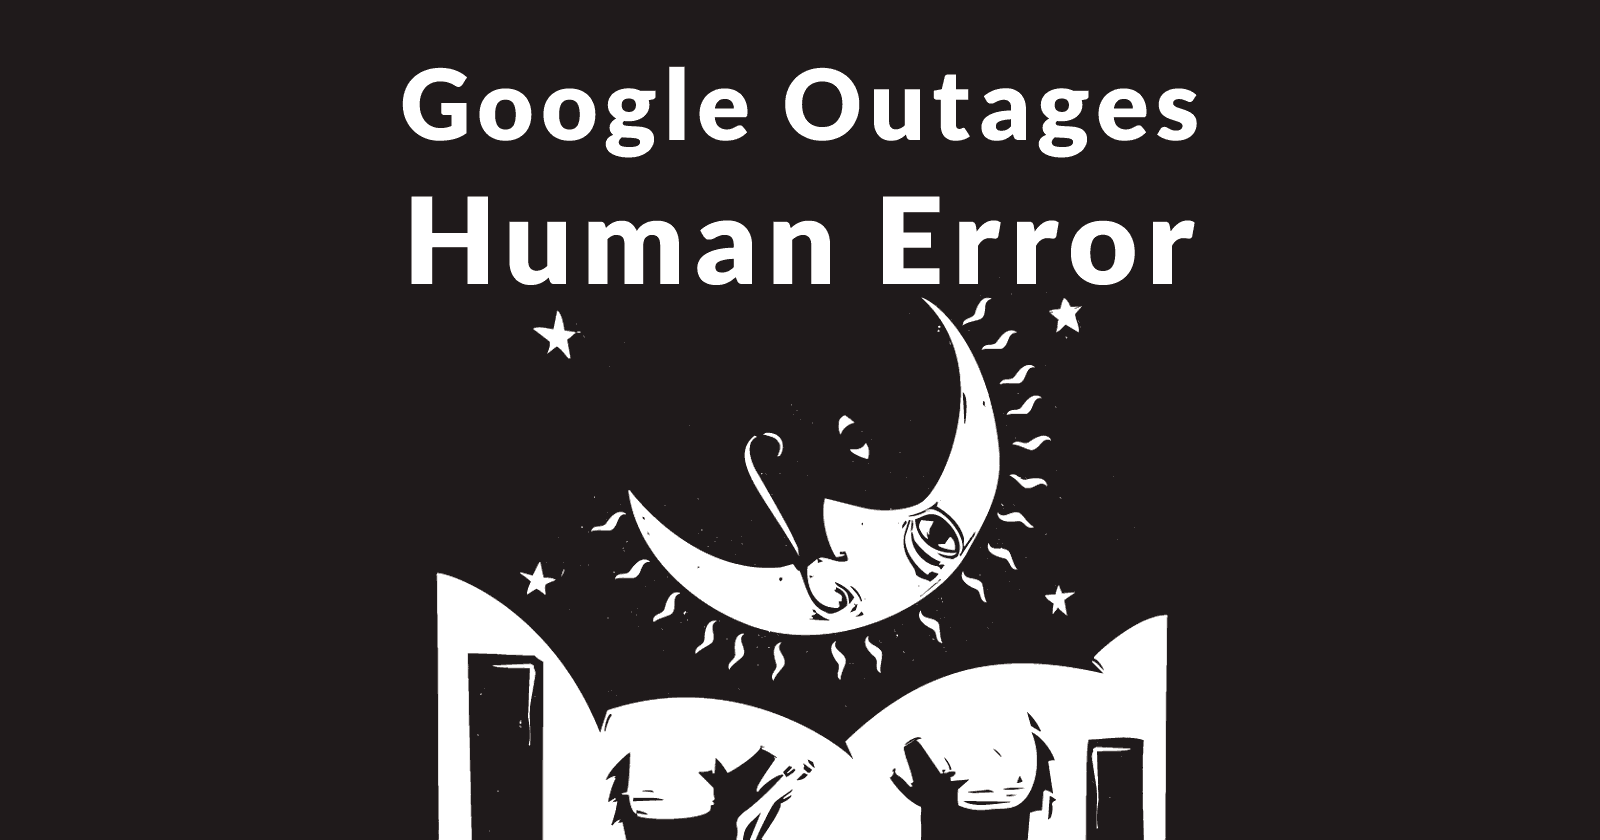 Image of the moon with dogs barking at it, with the words, Google Outages Human Error